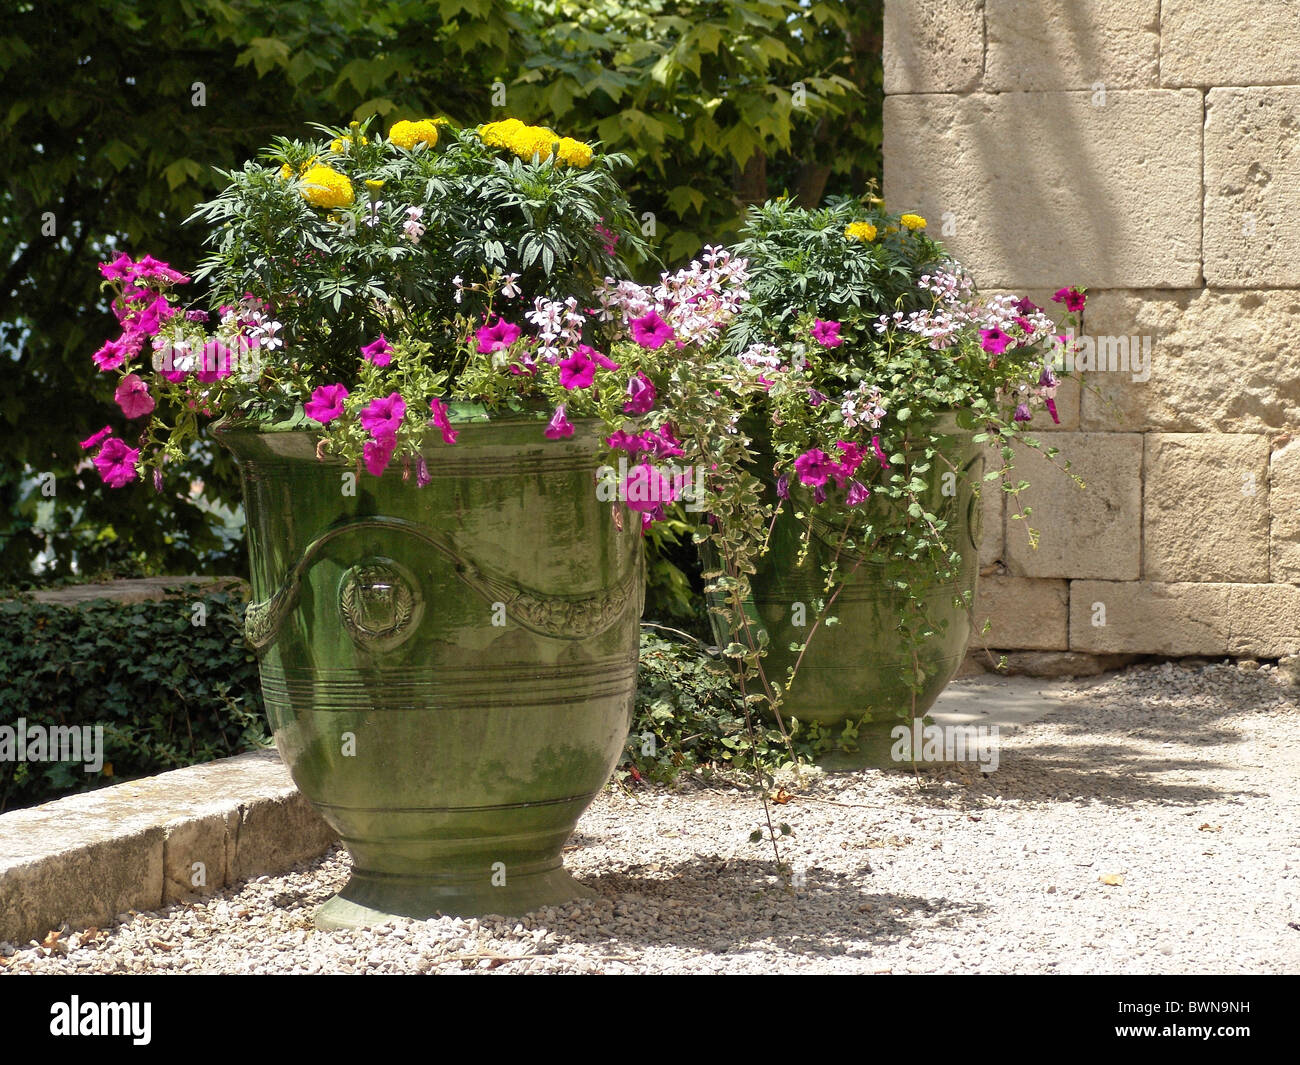 Blumenkübel High Resolution Stock Photography and Images - Alamy